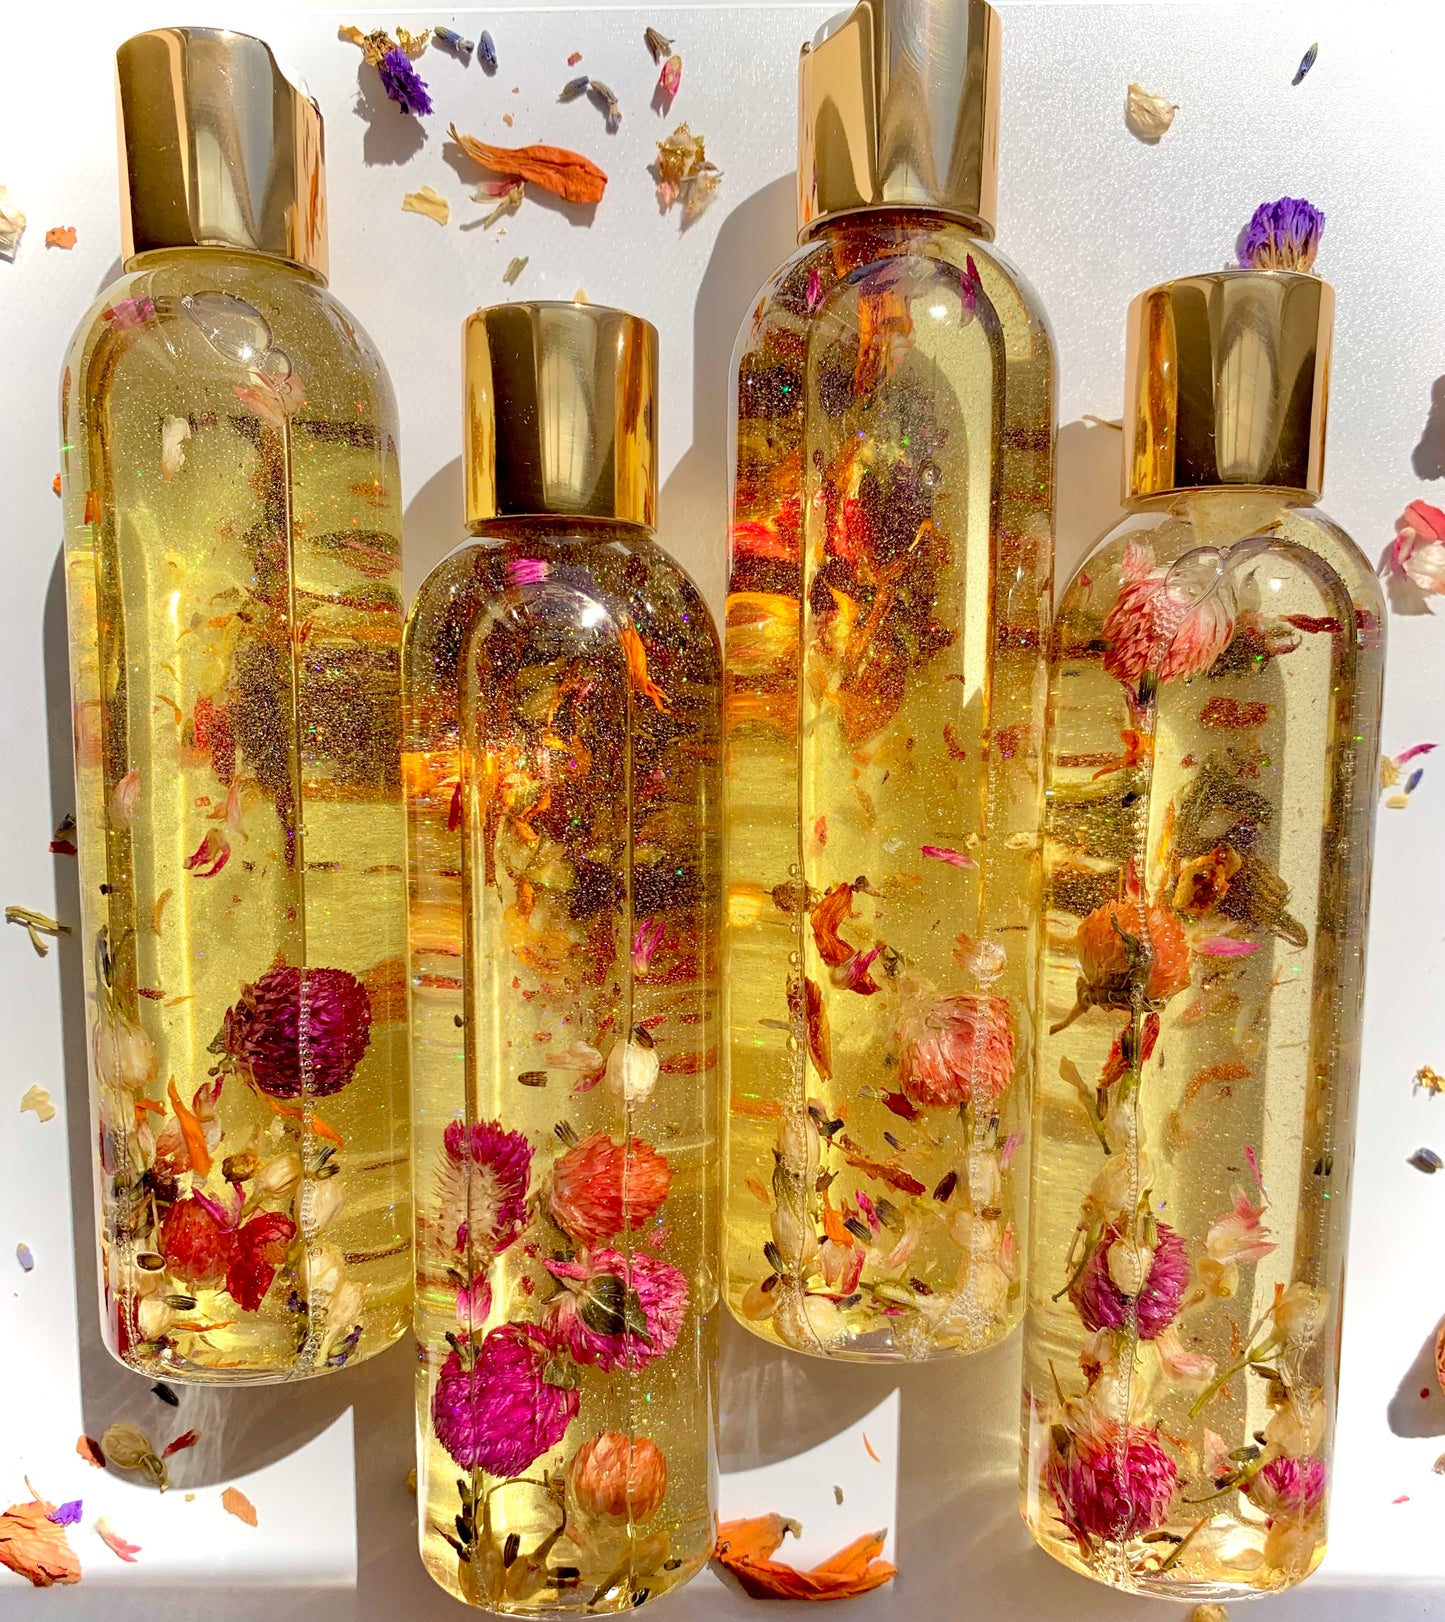 Floral Infused Body Shimmer Oil